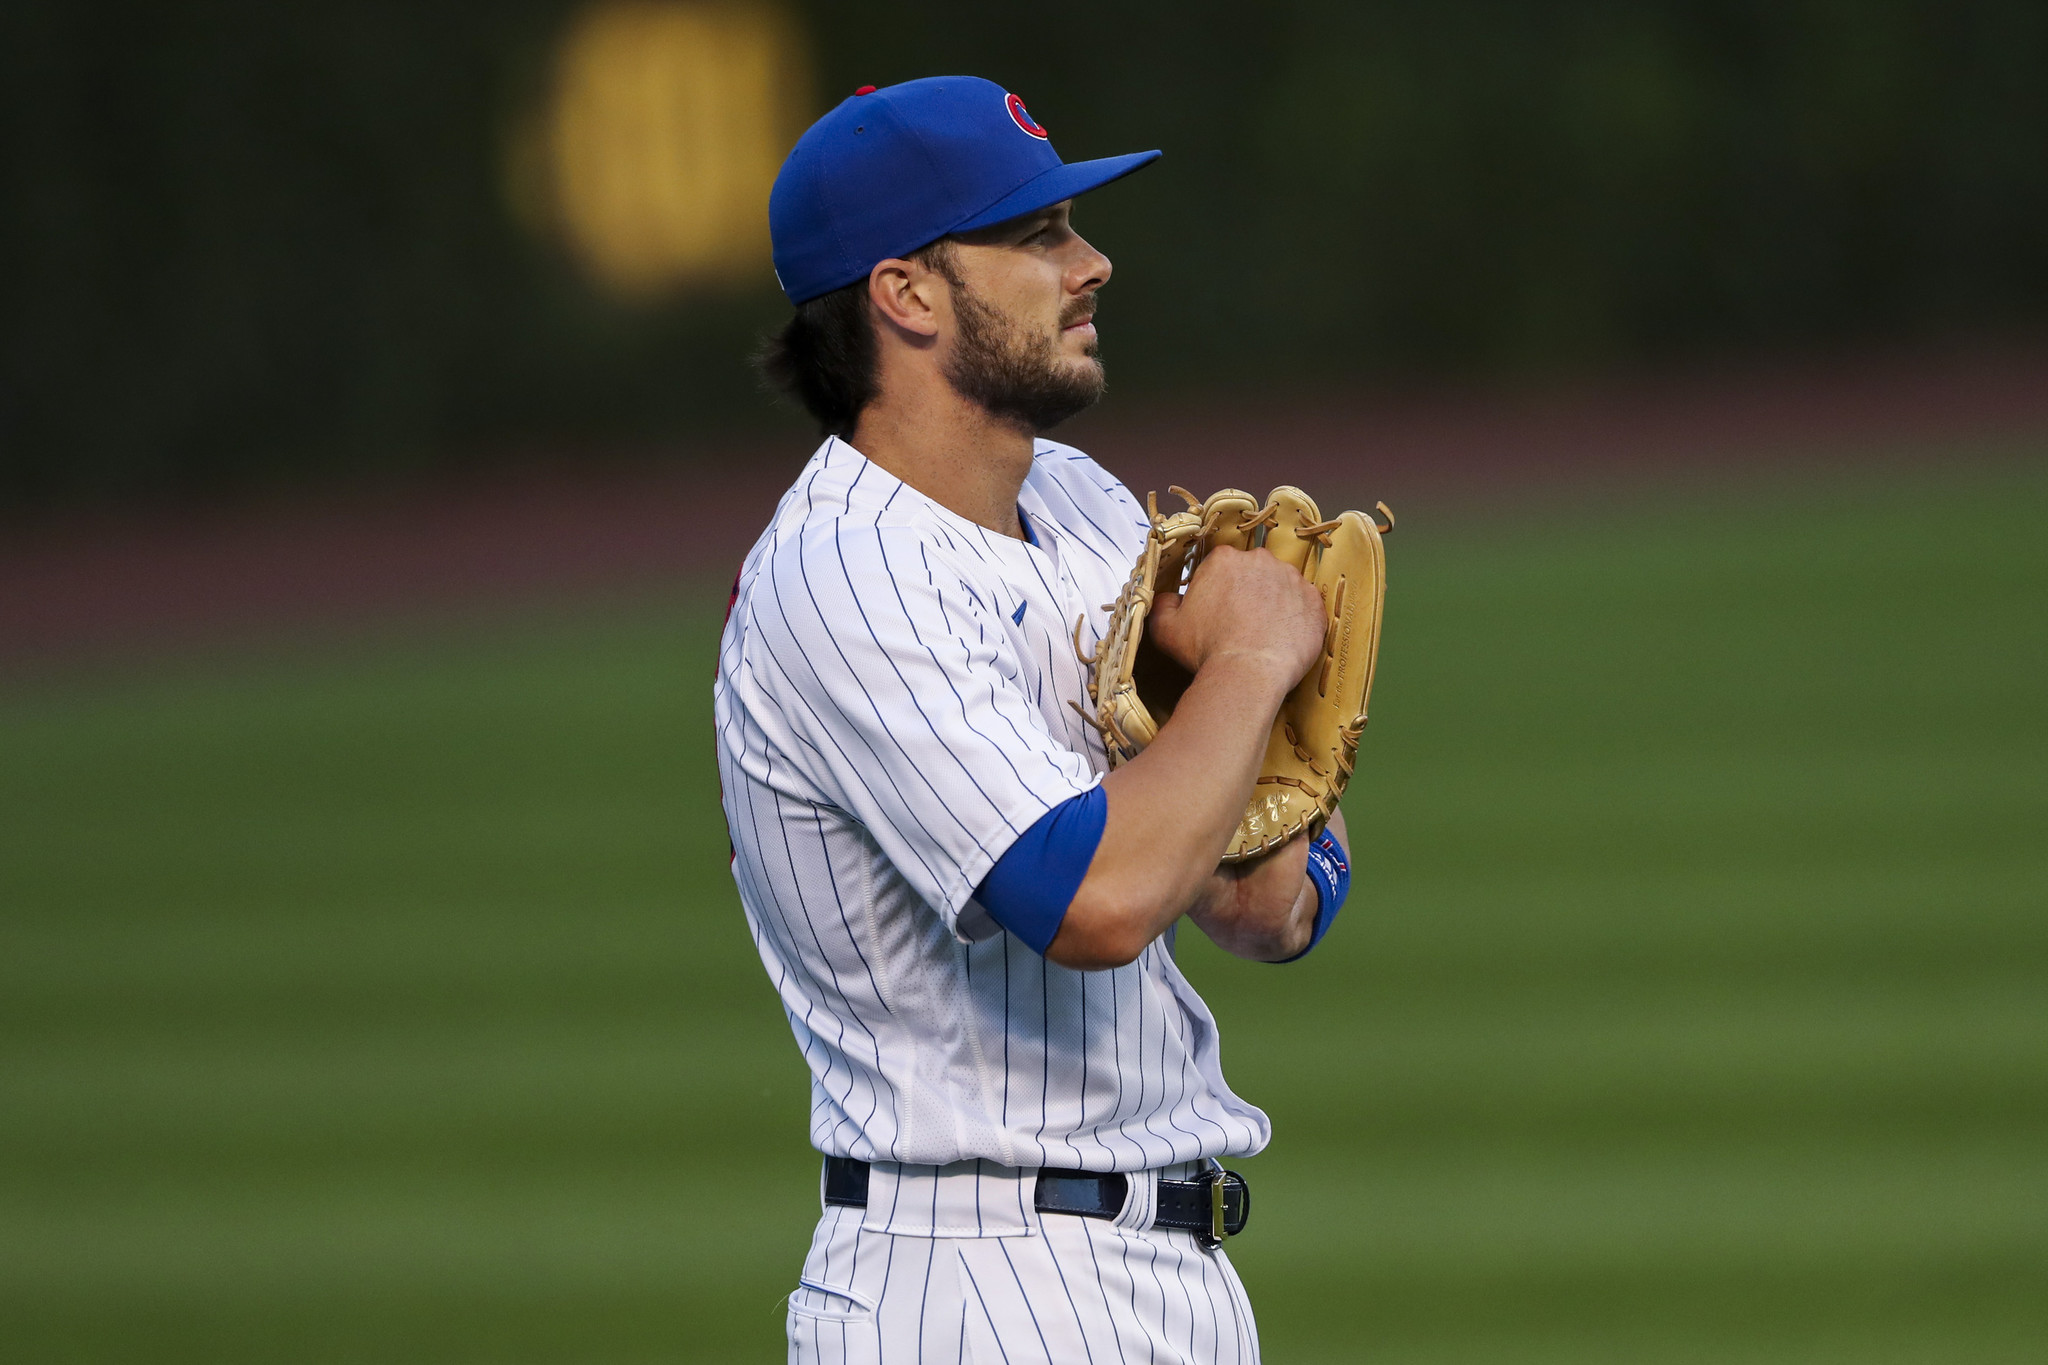 What just happened?': Alec Mills, Cubs reflect on 2-year